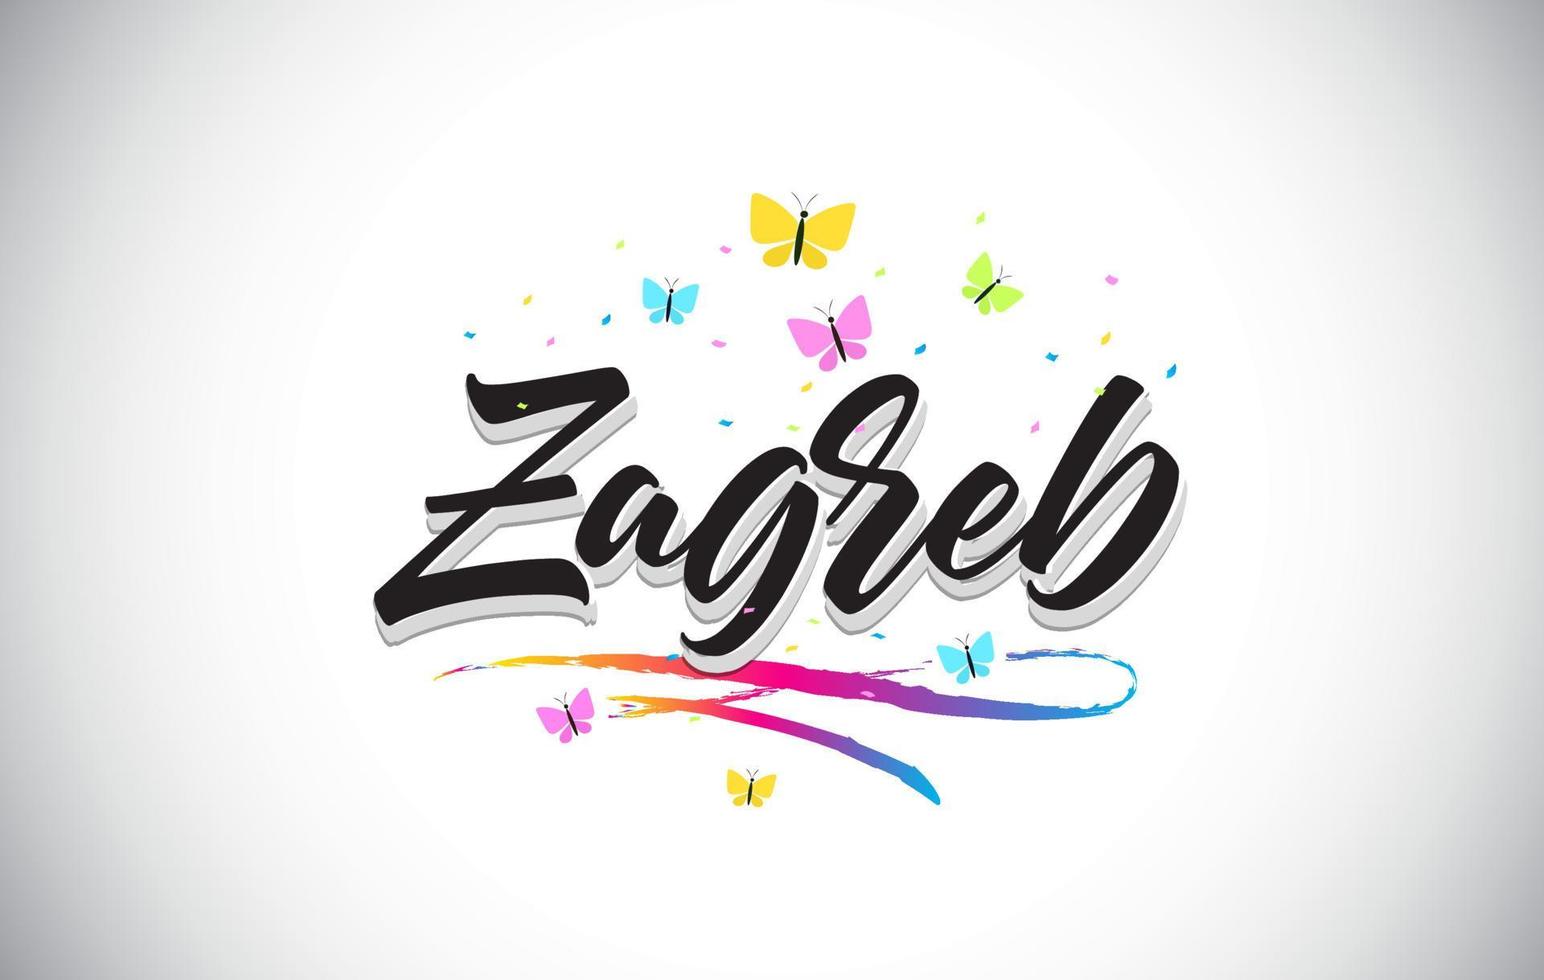 Zagreb Handwritten Vector Word Text with Butterflies and Colorful Swoosh.